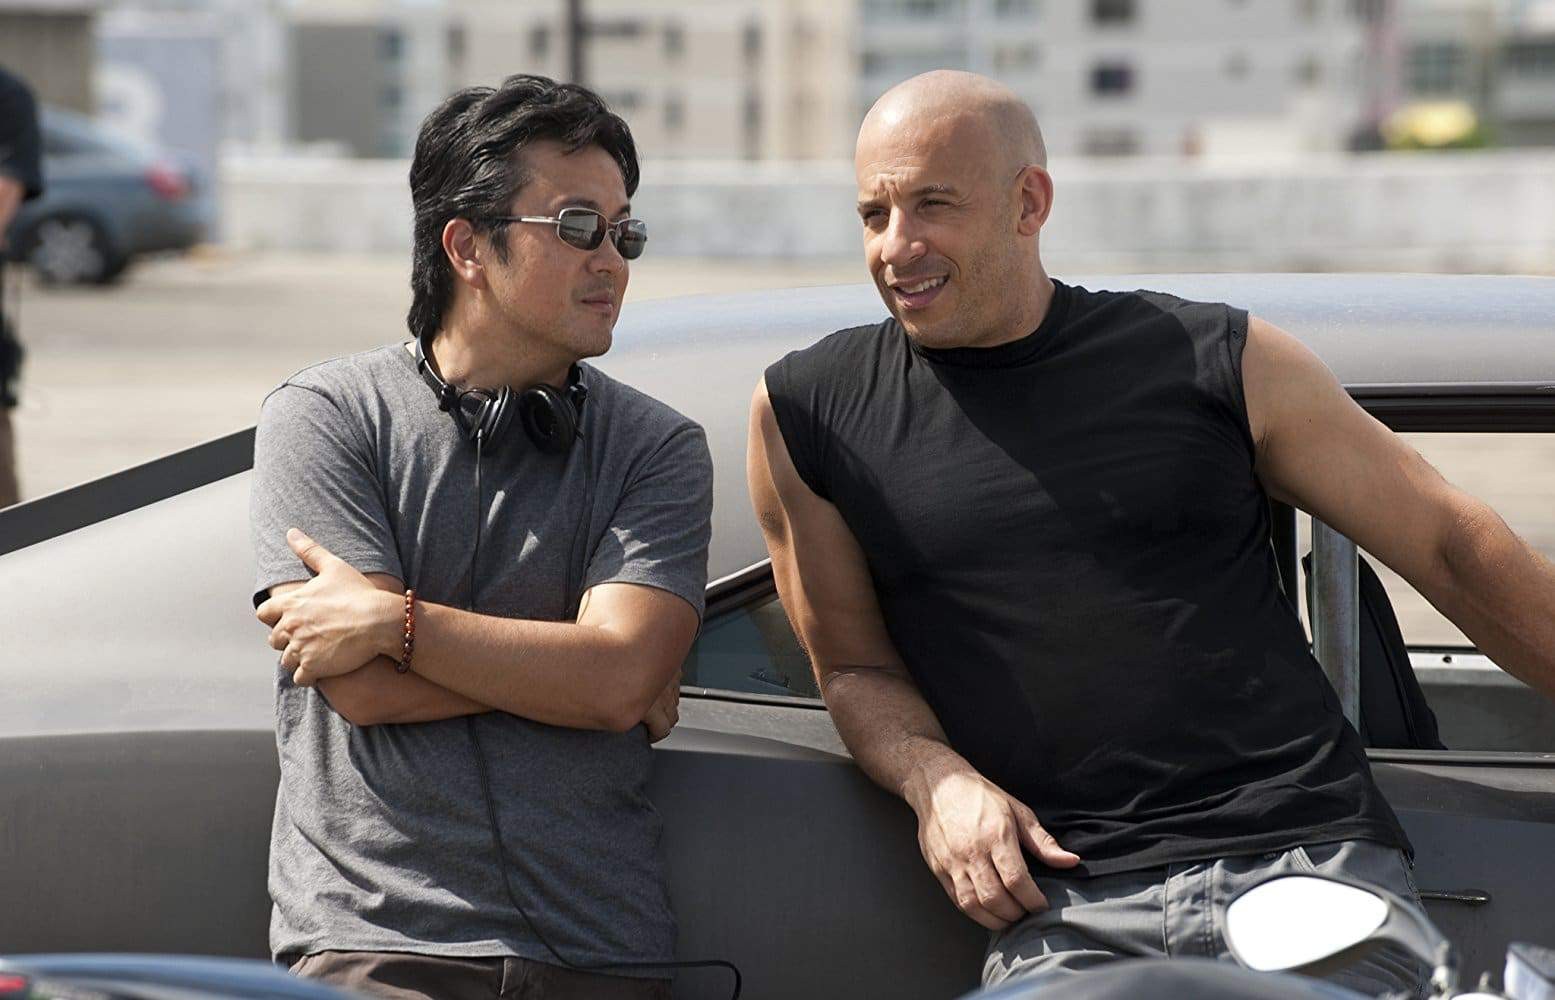 Tokyo Drift director Justin Lin on the set of Fast & Furious movies